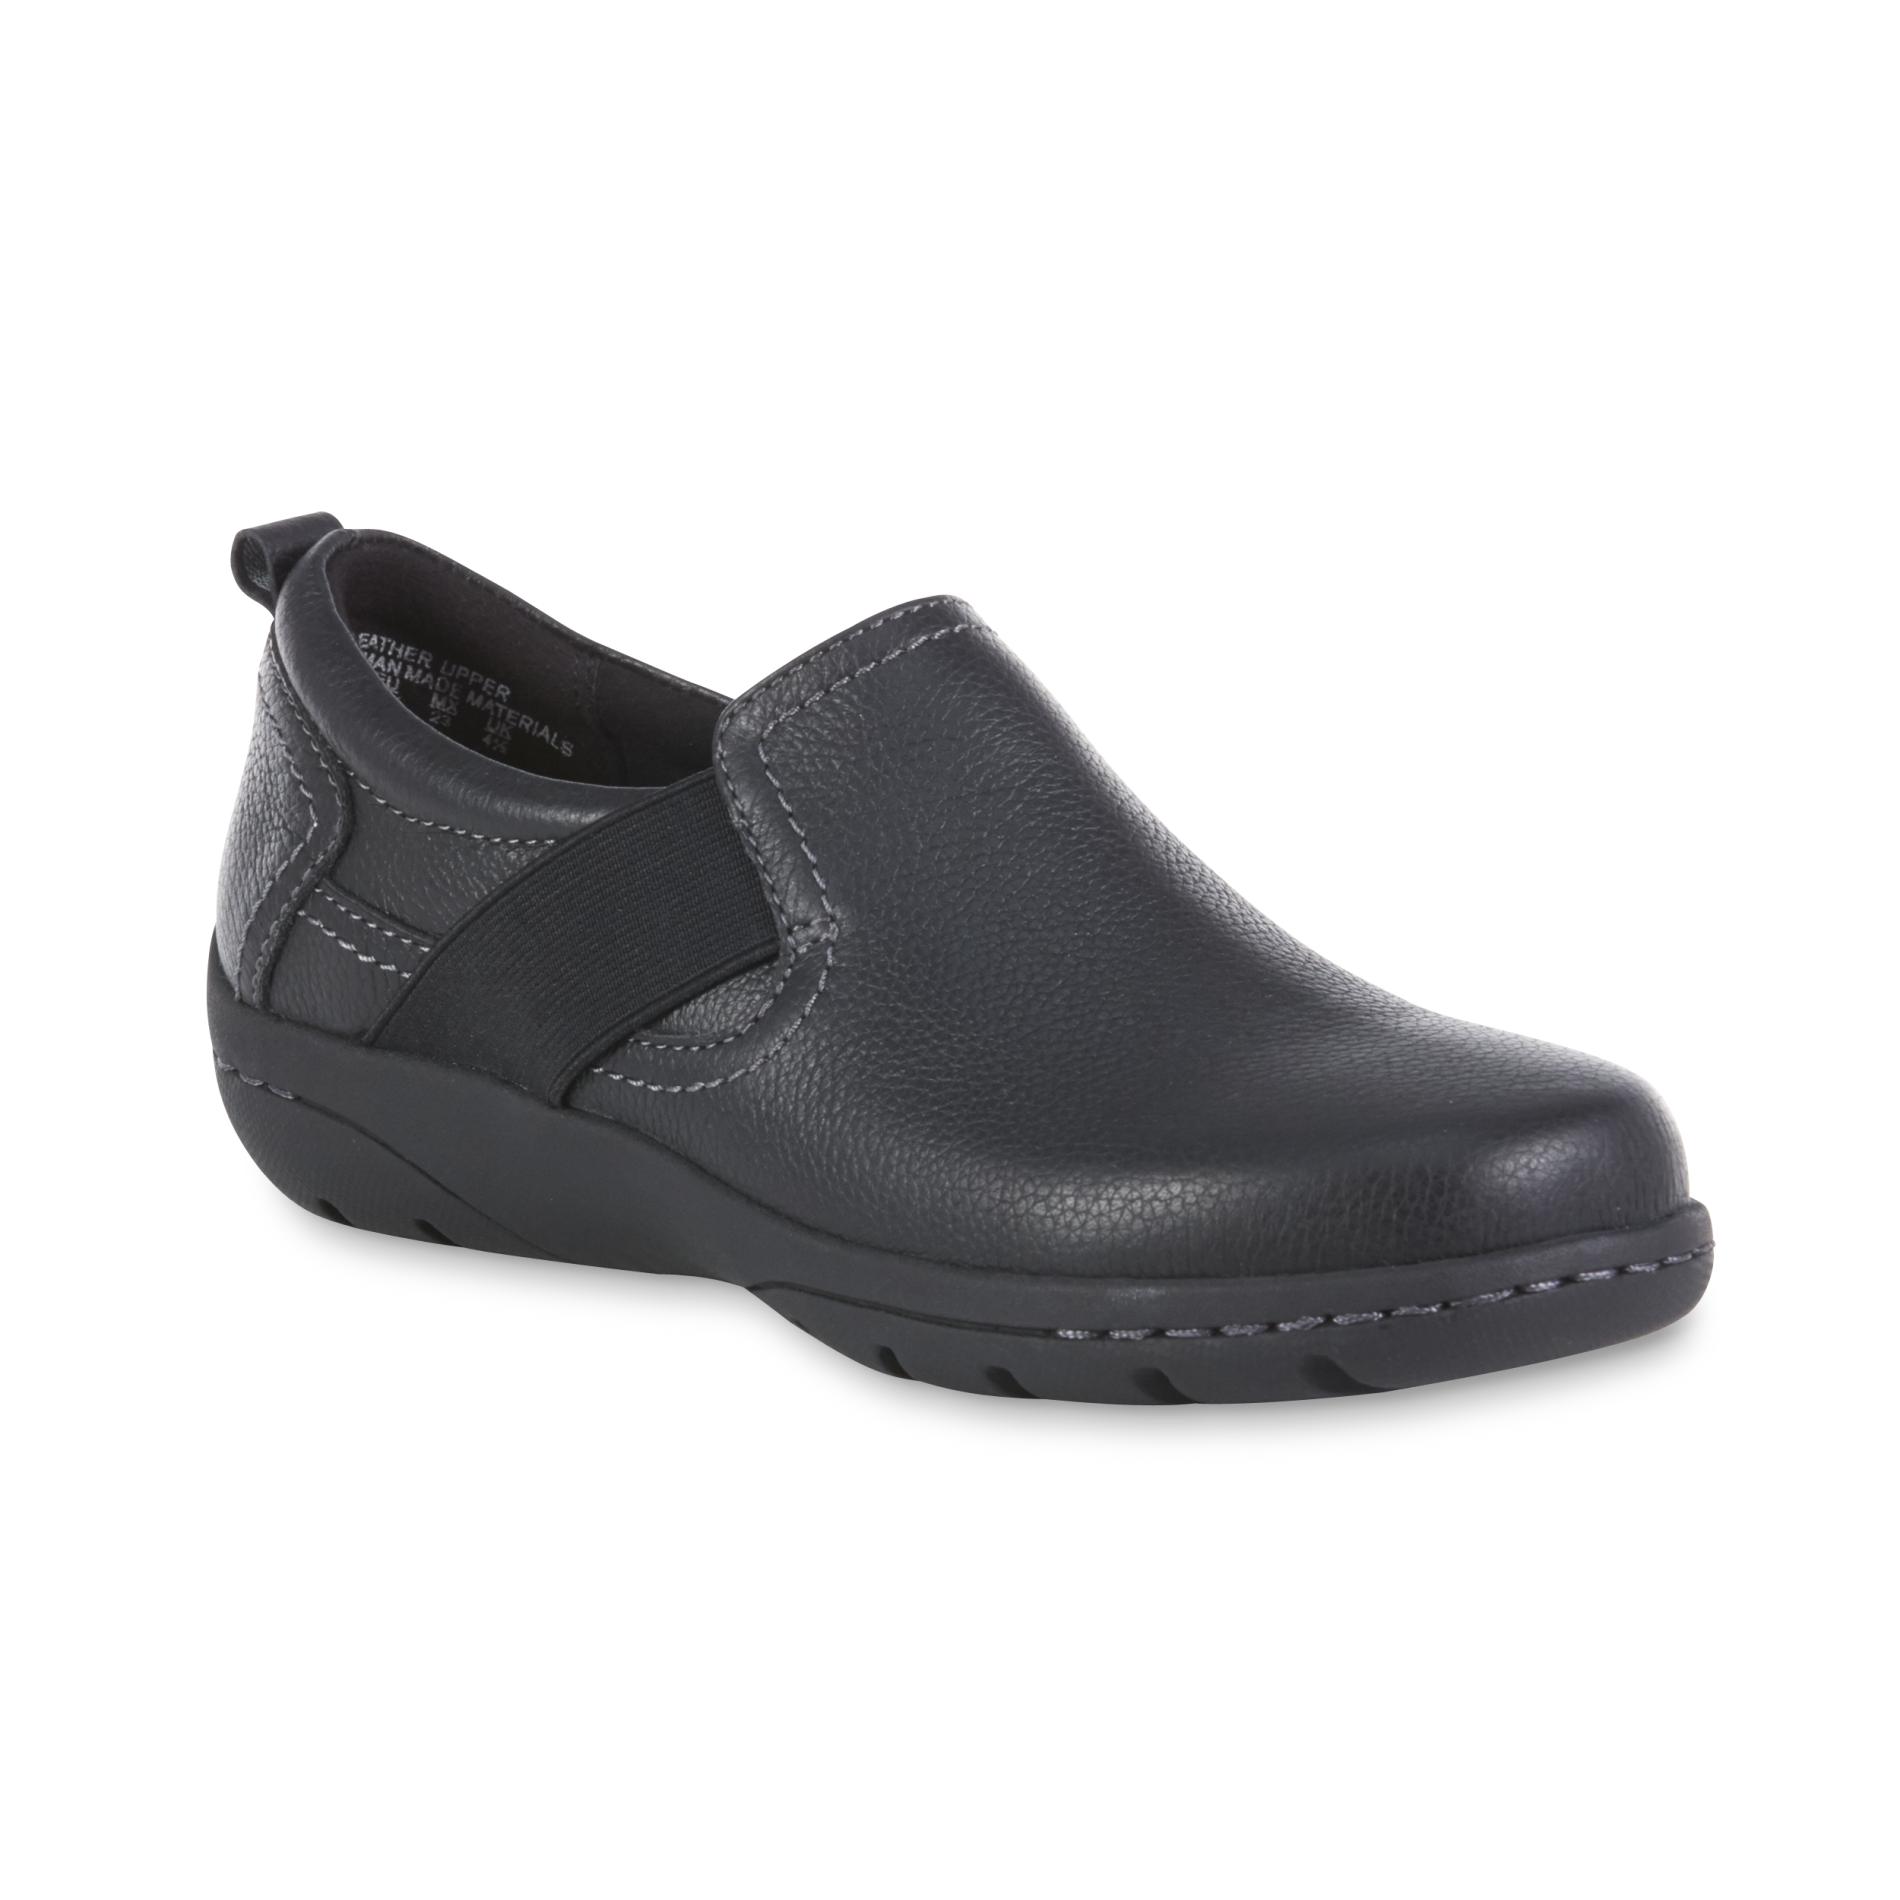 Thom McAn Women's Dalton Leather Loafer - Black Wide Width Available ...